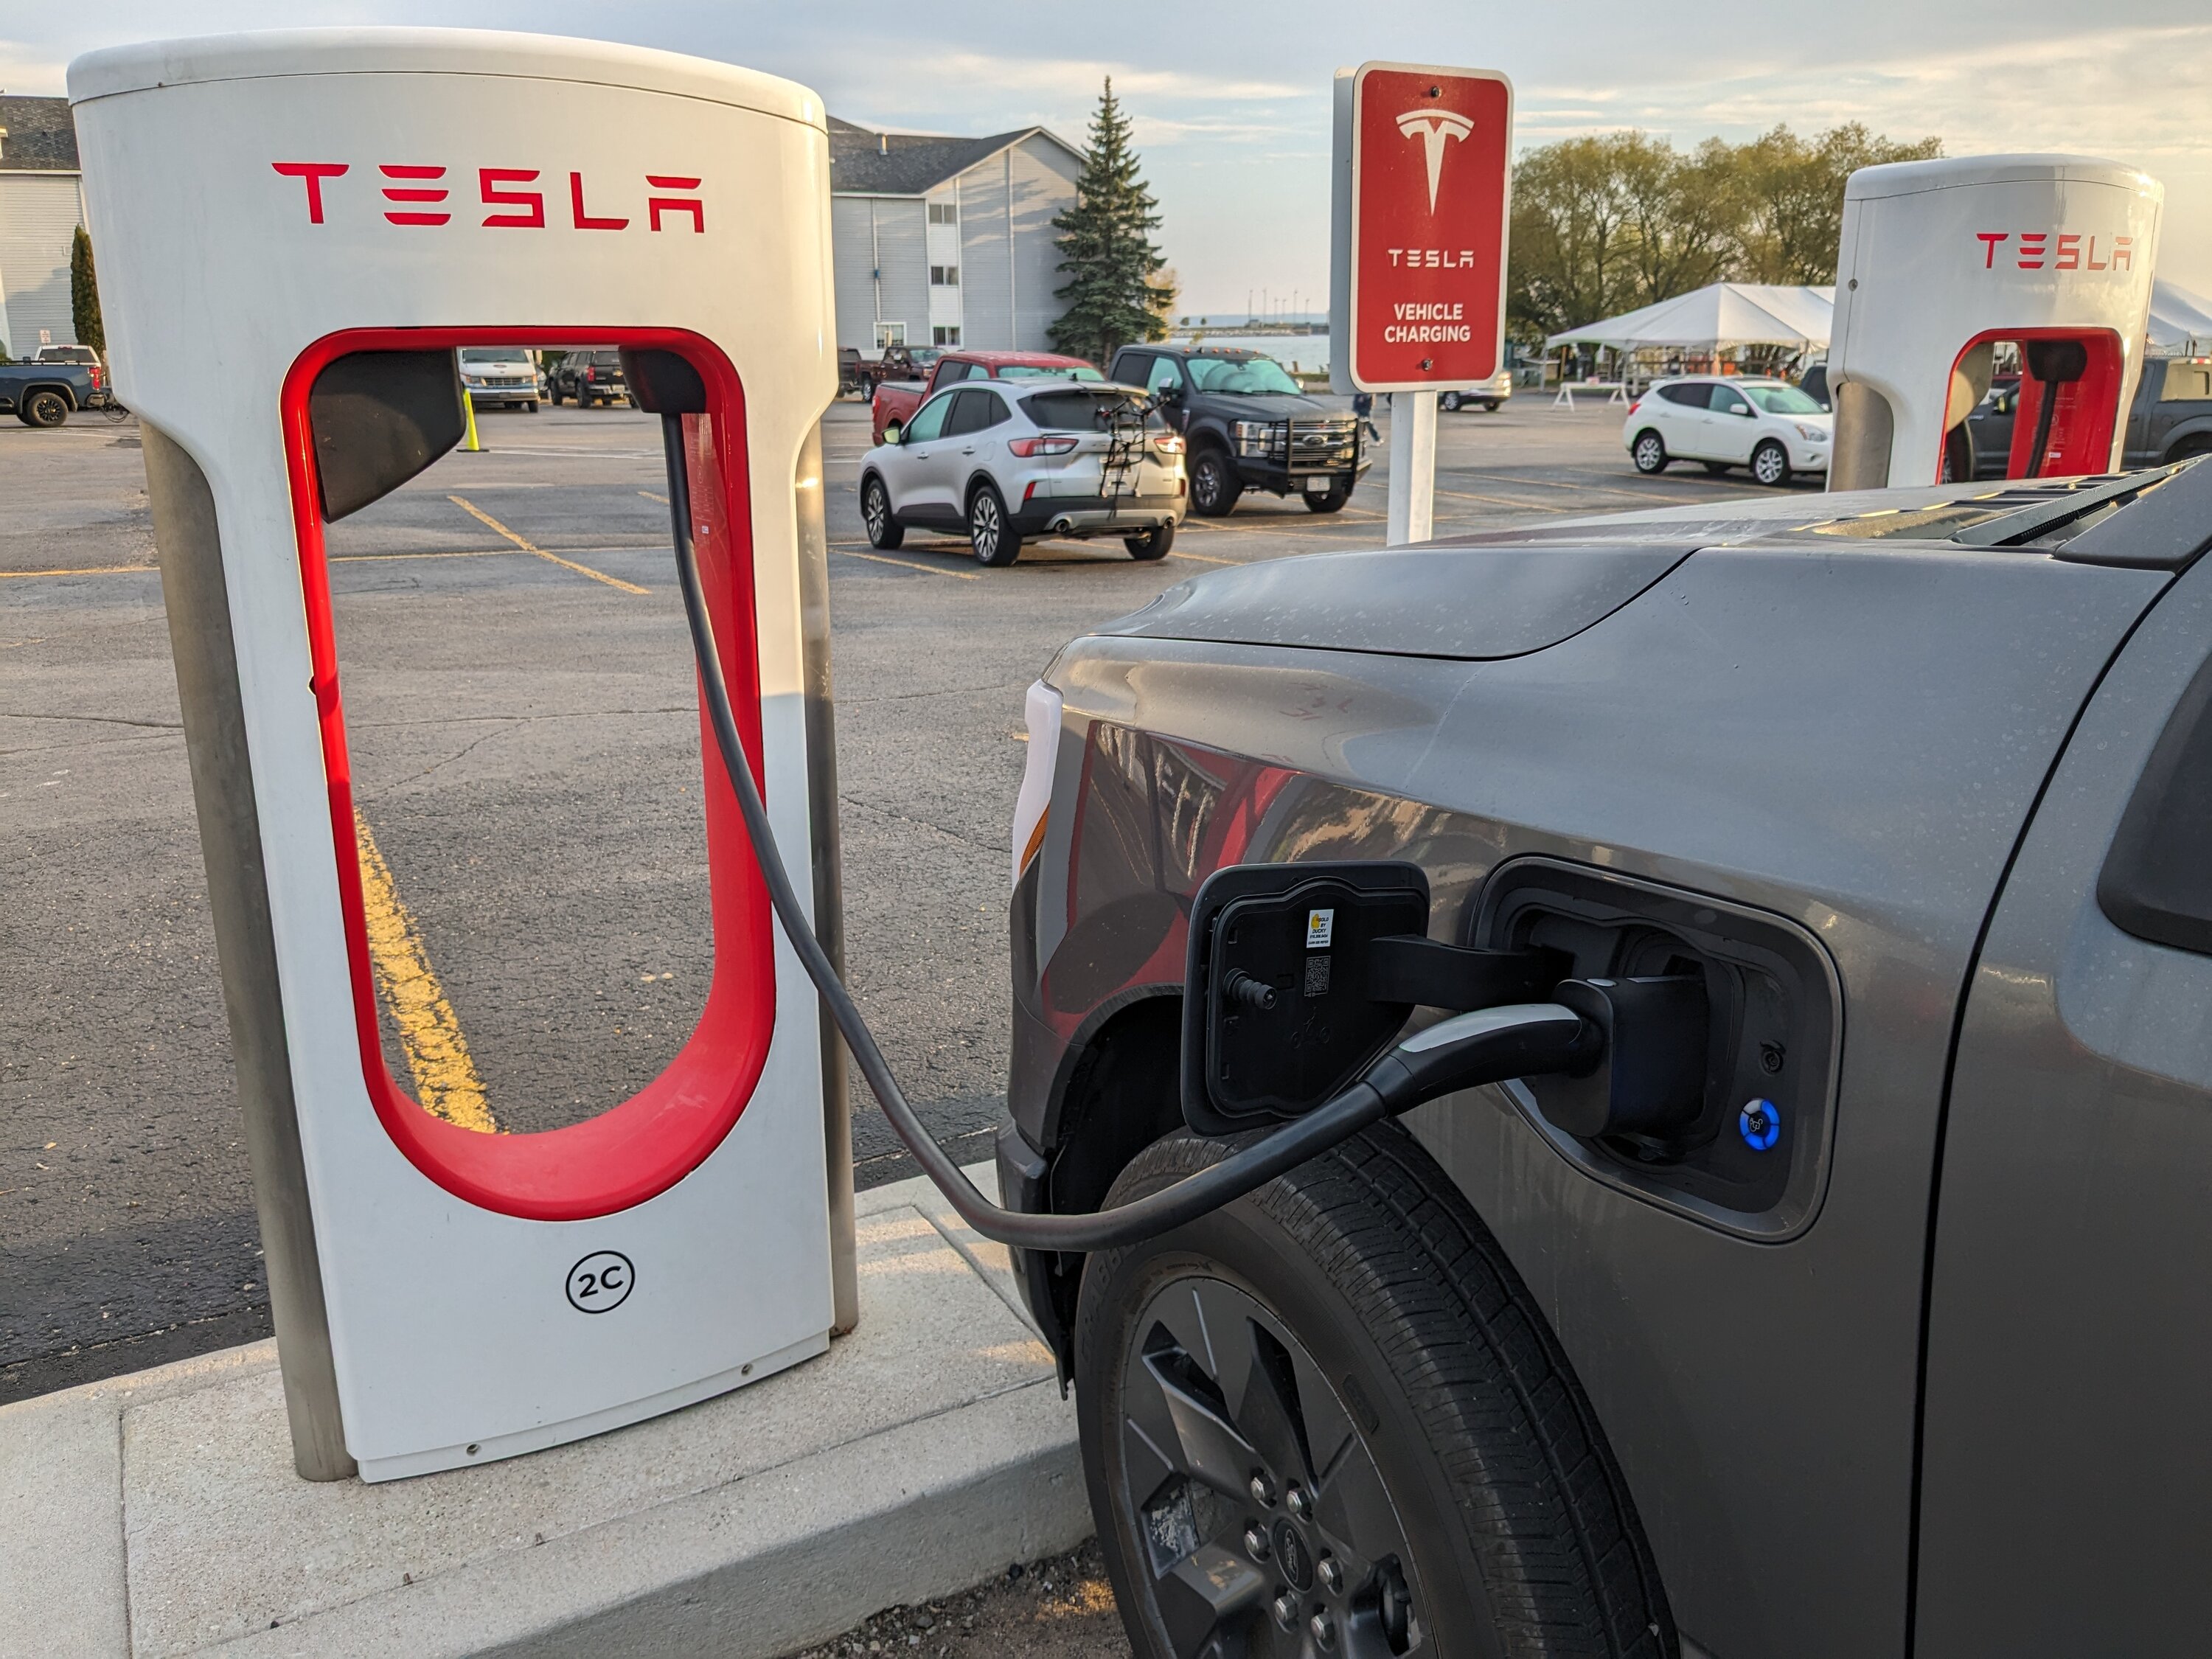 Tesla Starts Retrofitting Superchargers With Magic Dock to Allow Other EVs  to Charge